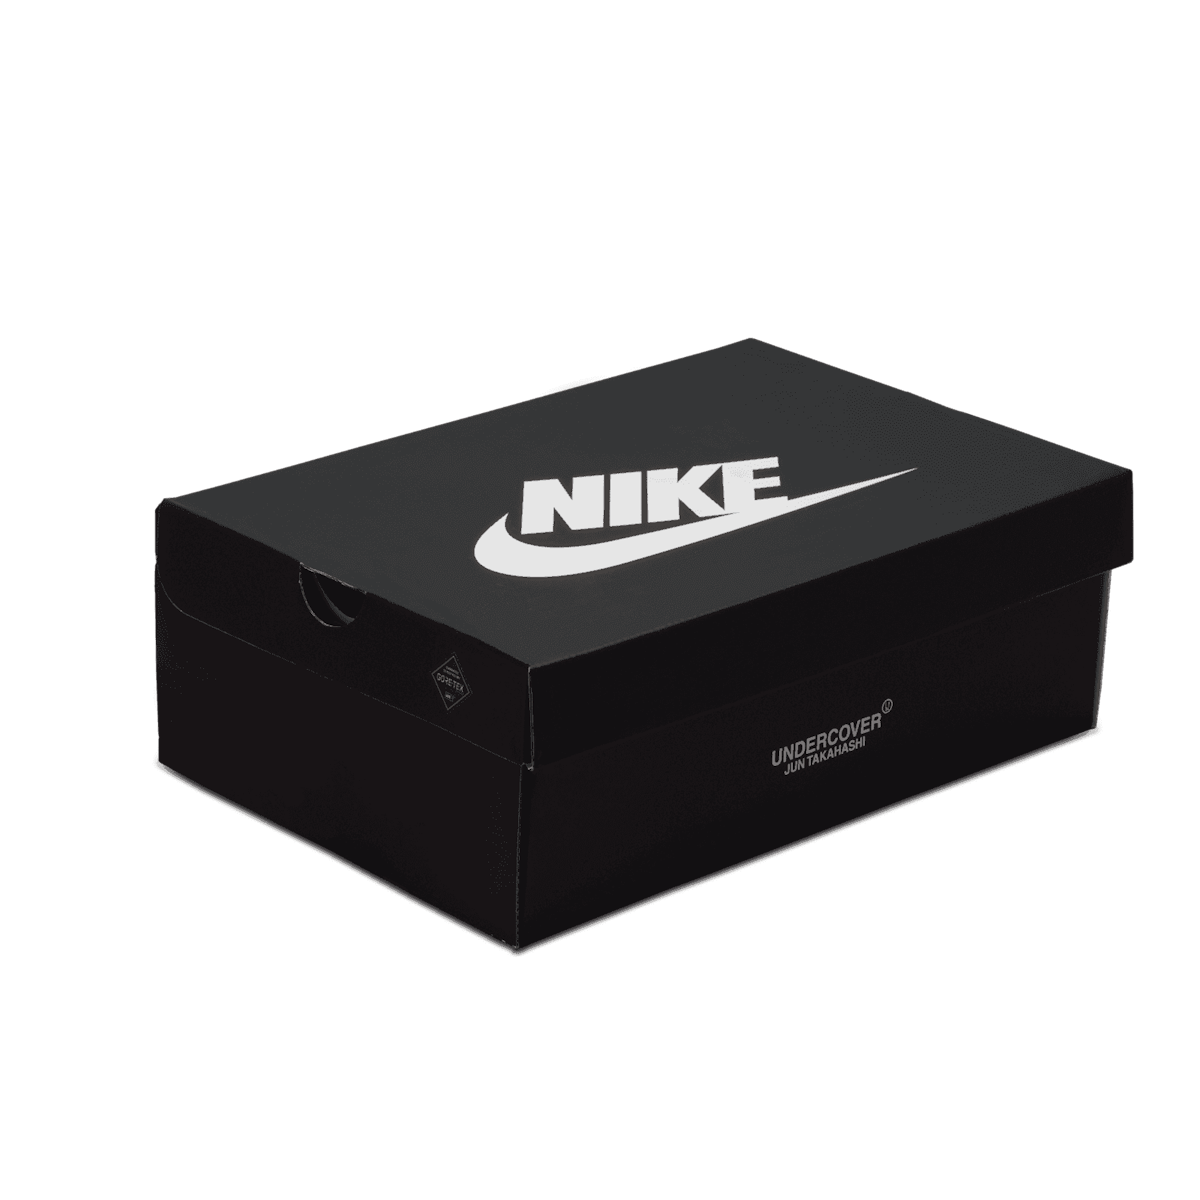 Nike Air Force 1 Low Gore-Tex UNDERCOVER Black - DQ7558-002 